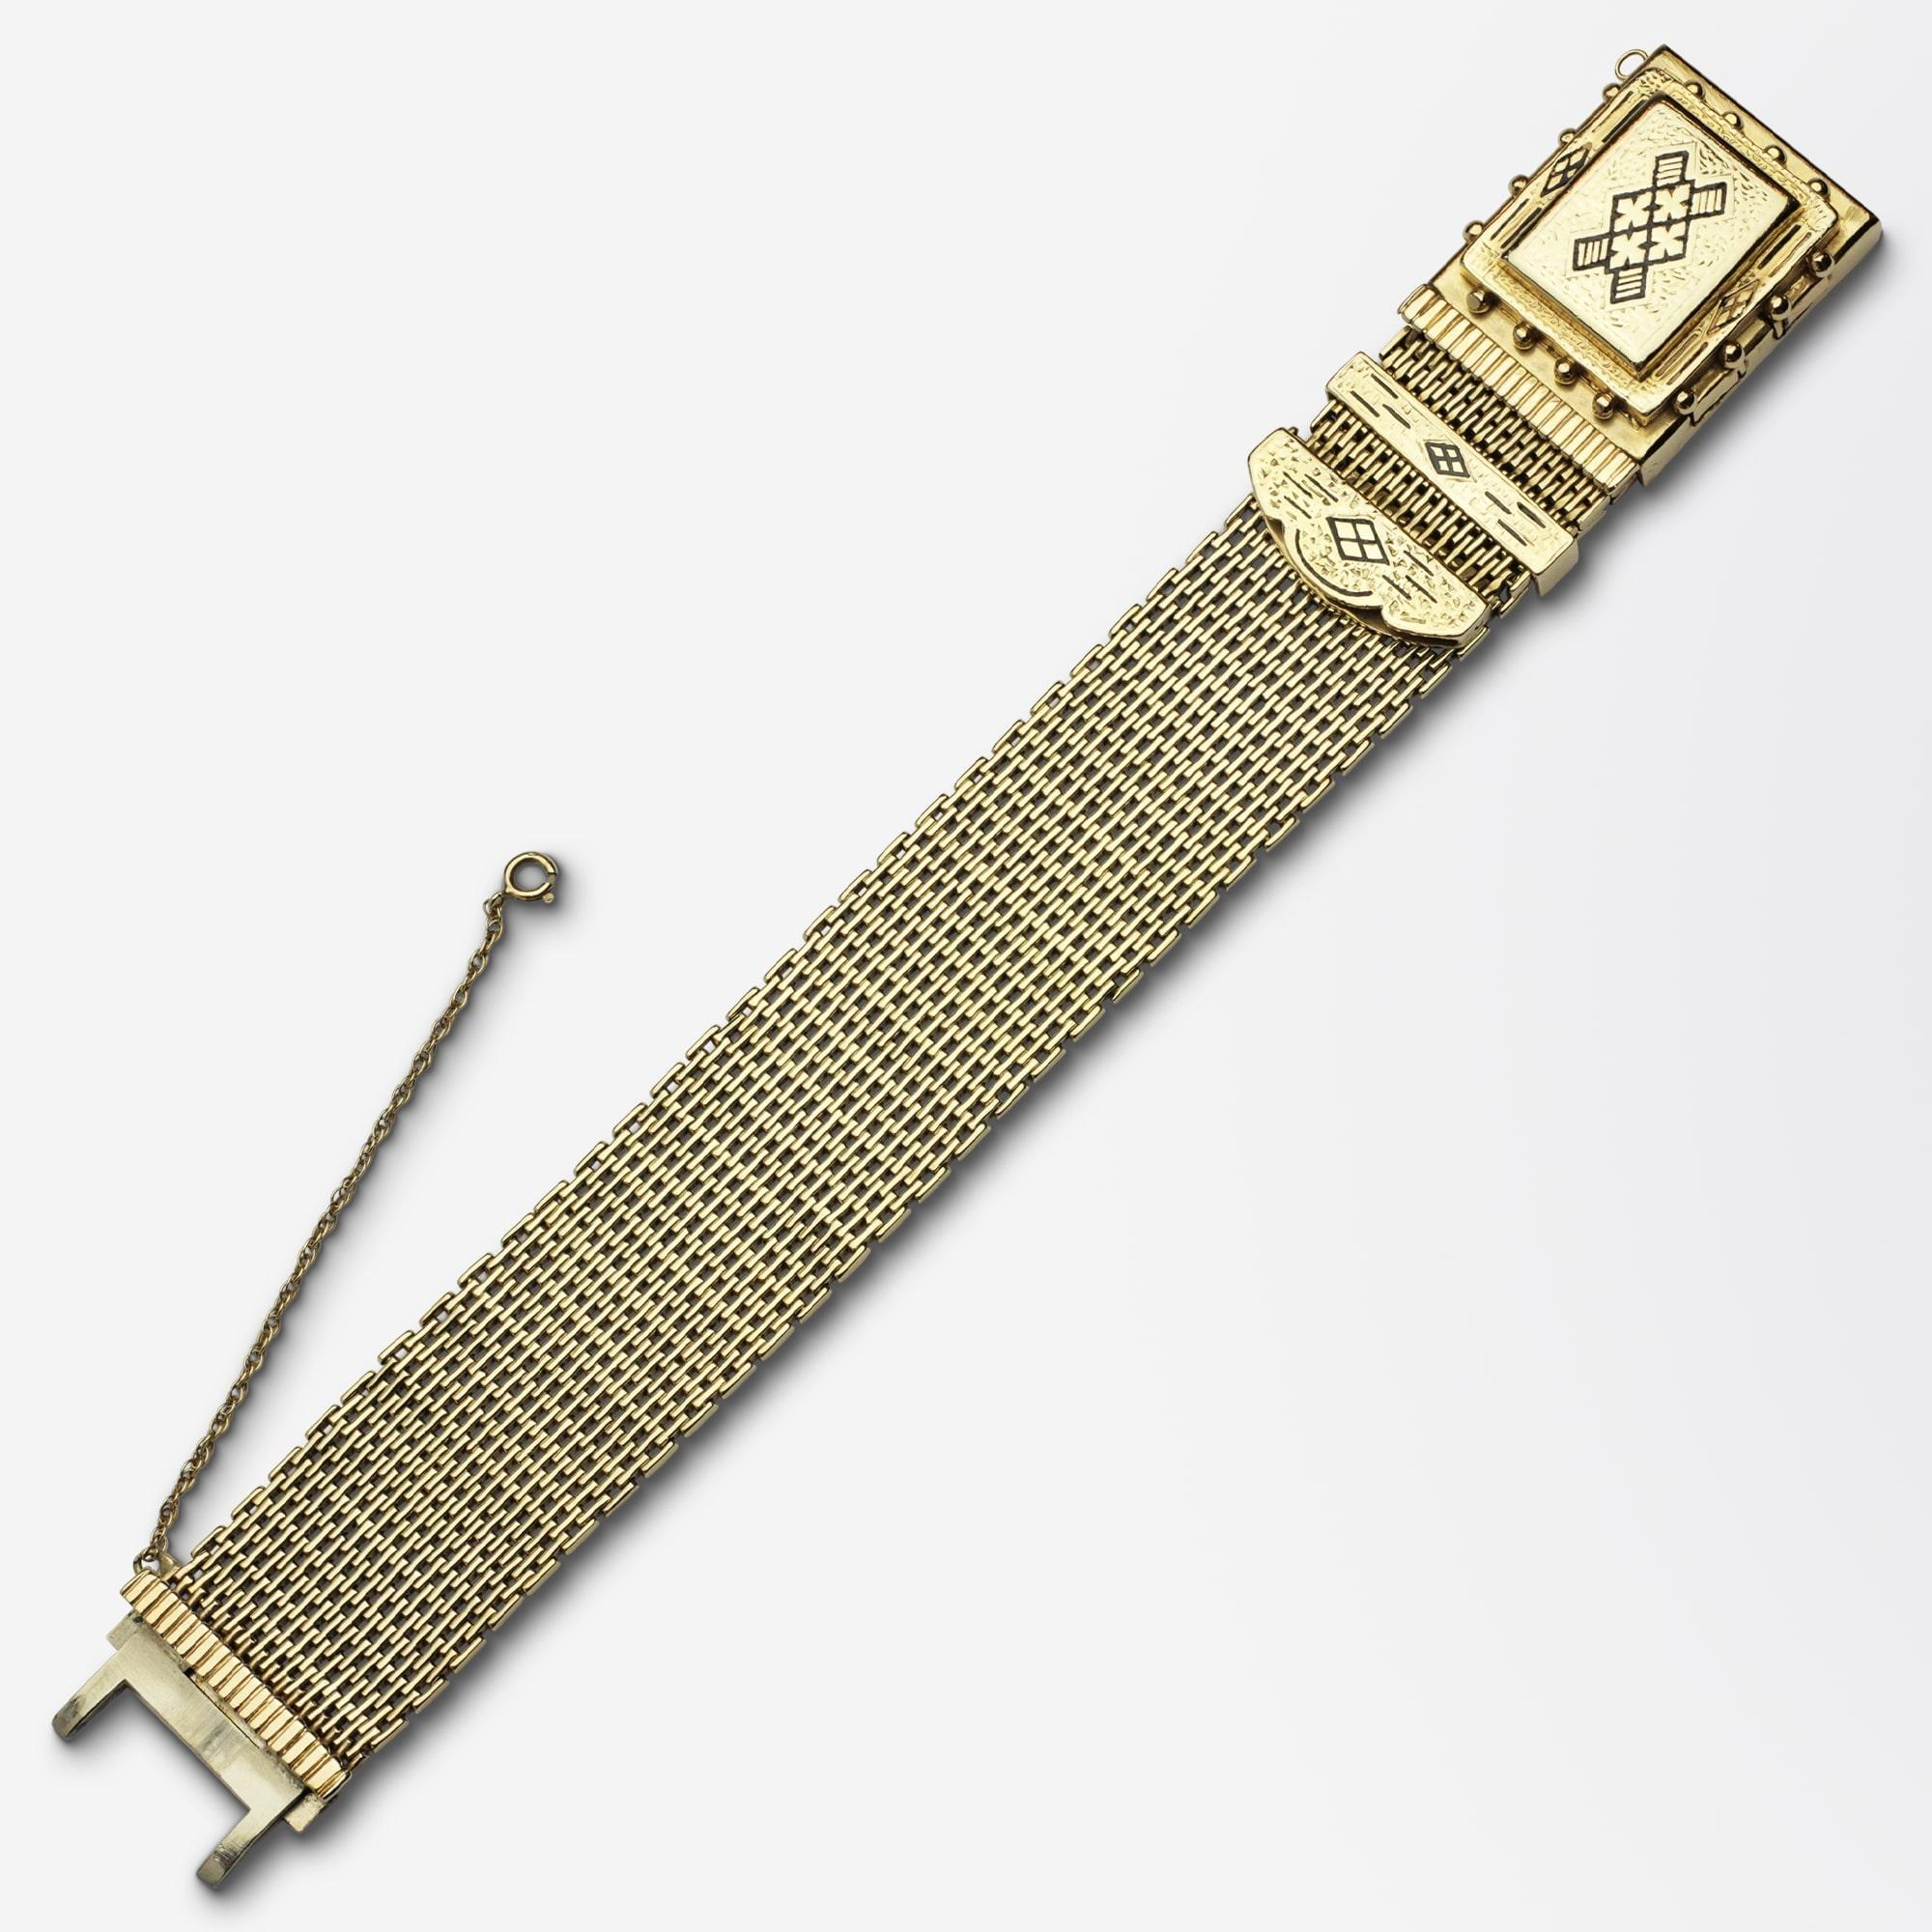 An unusual 14 karat yellow gold bracelet in the Victorian taste with delicate black enamelling. The small bar riveted style bracelet has a hinged lid centre box with black enamelled inlay as a feature with scalloped end cap and slide which form a